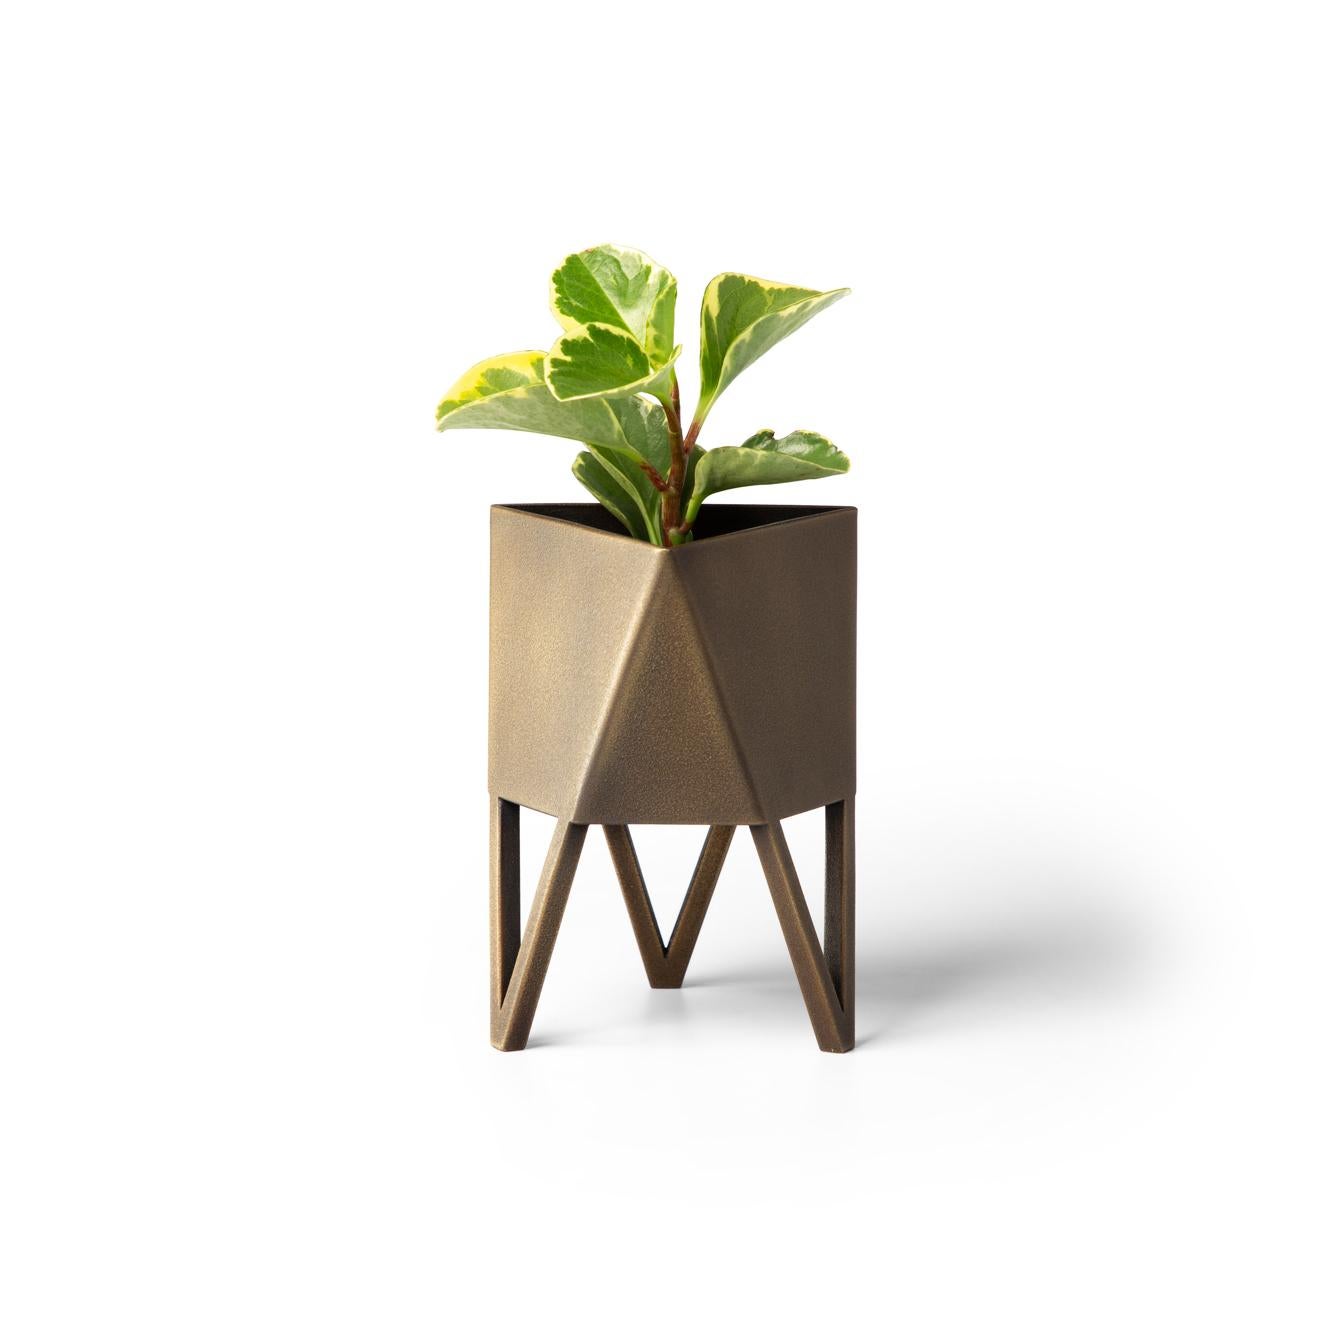 Hand-Crafted Large Deca Planter, Light Pink, Steel, Indoor/Outdoor, Geometric, Force/Collide